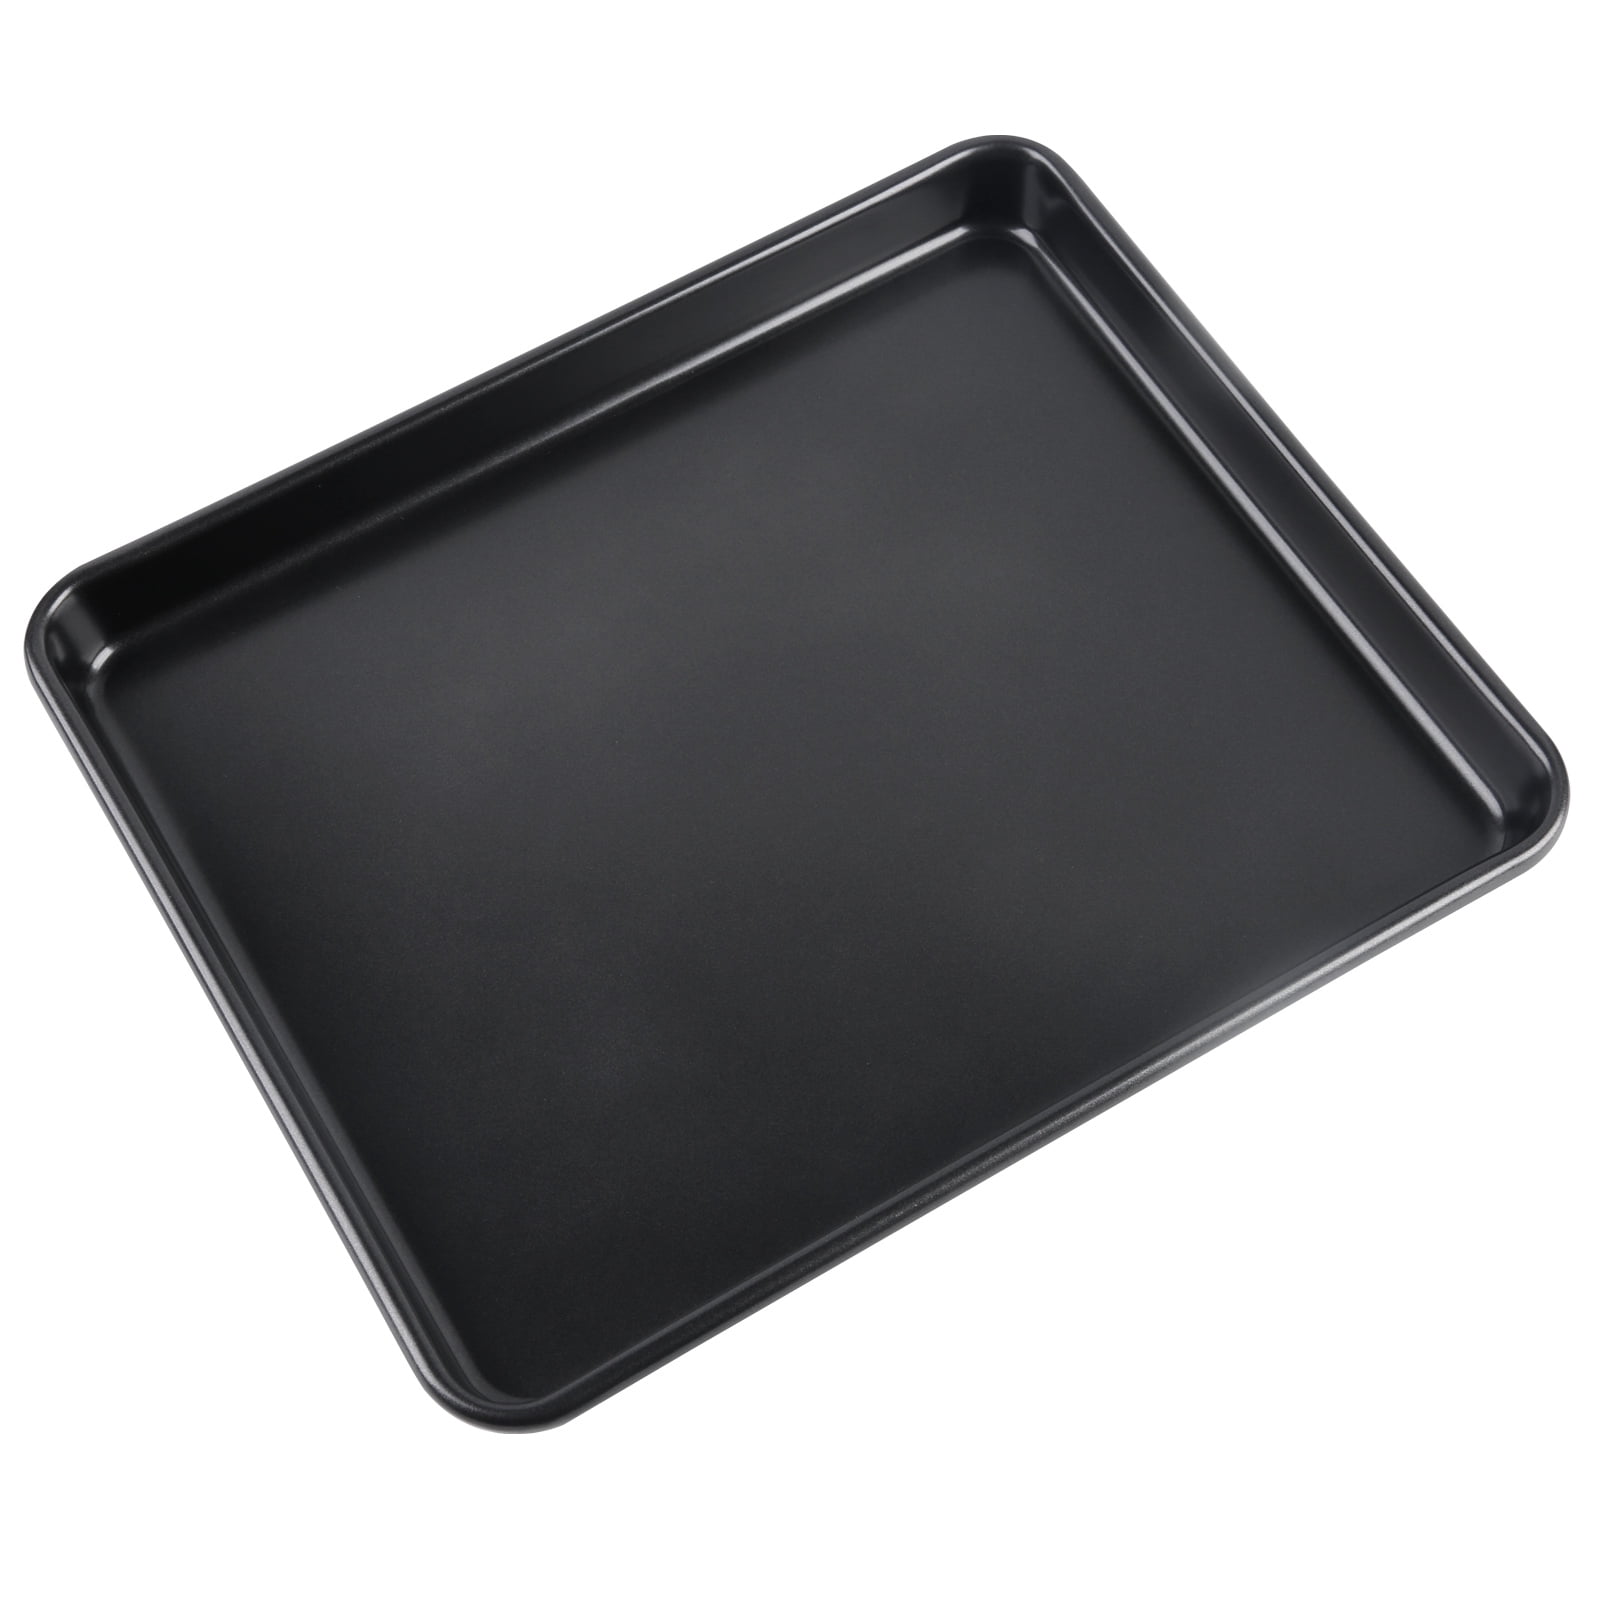 West Bend non-stick baking pans - 2 cookie sheets 14 x 17, square pan 9  x 9 x 2 and rectangular pan 9 x 5 x 3 - VG Cond. - Lil